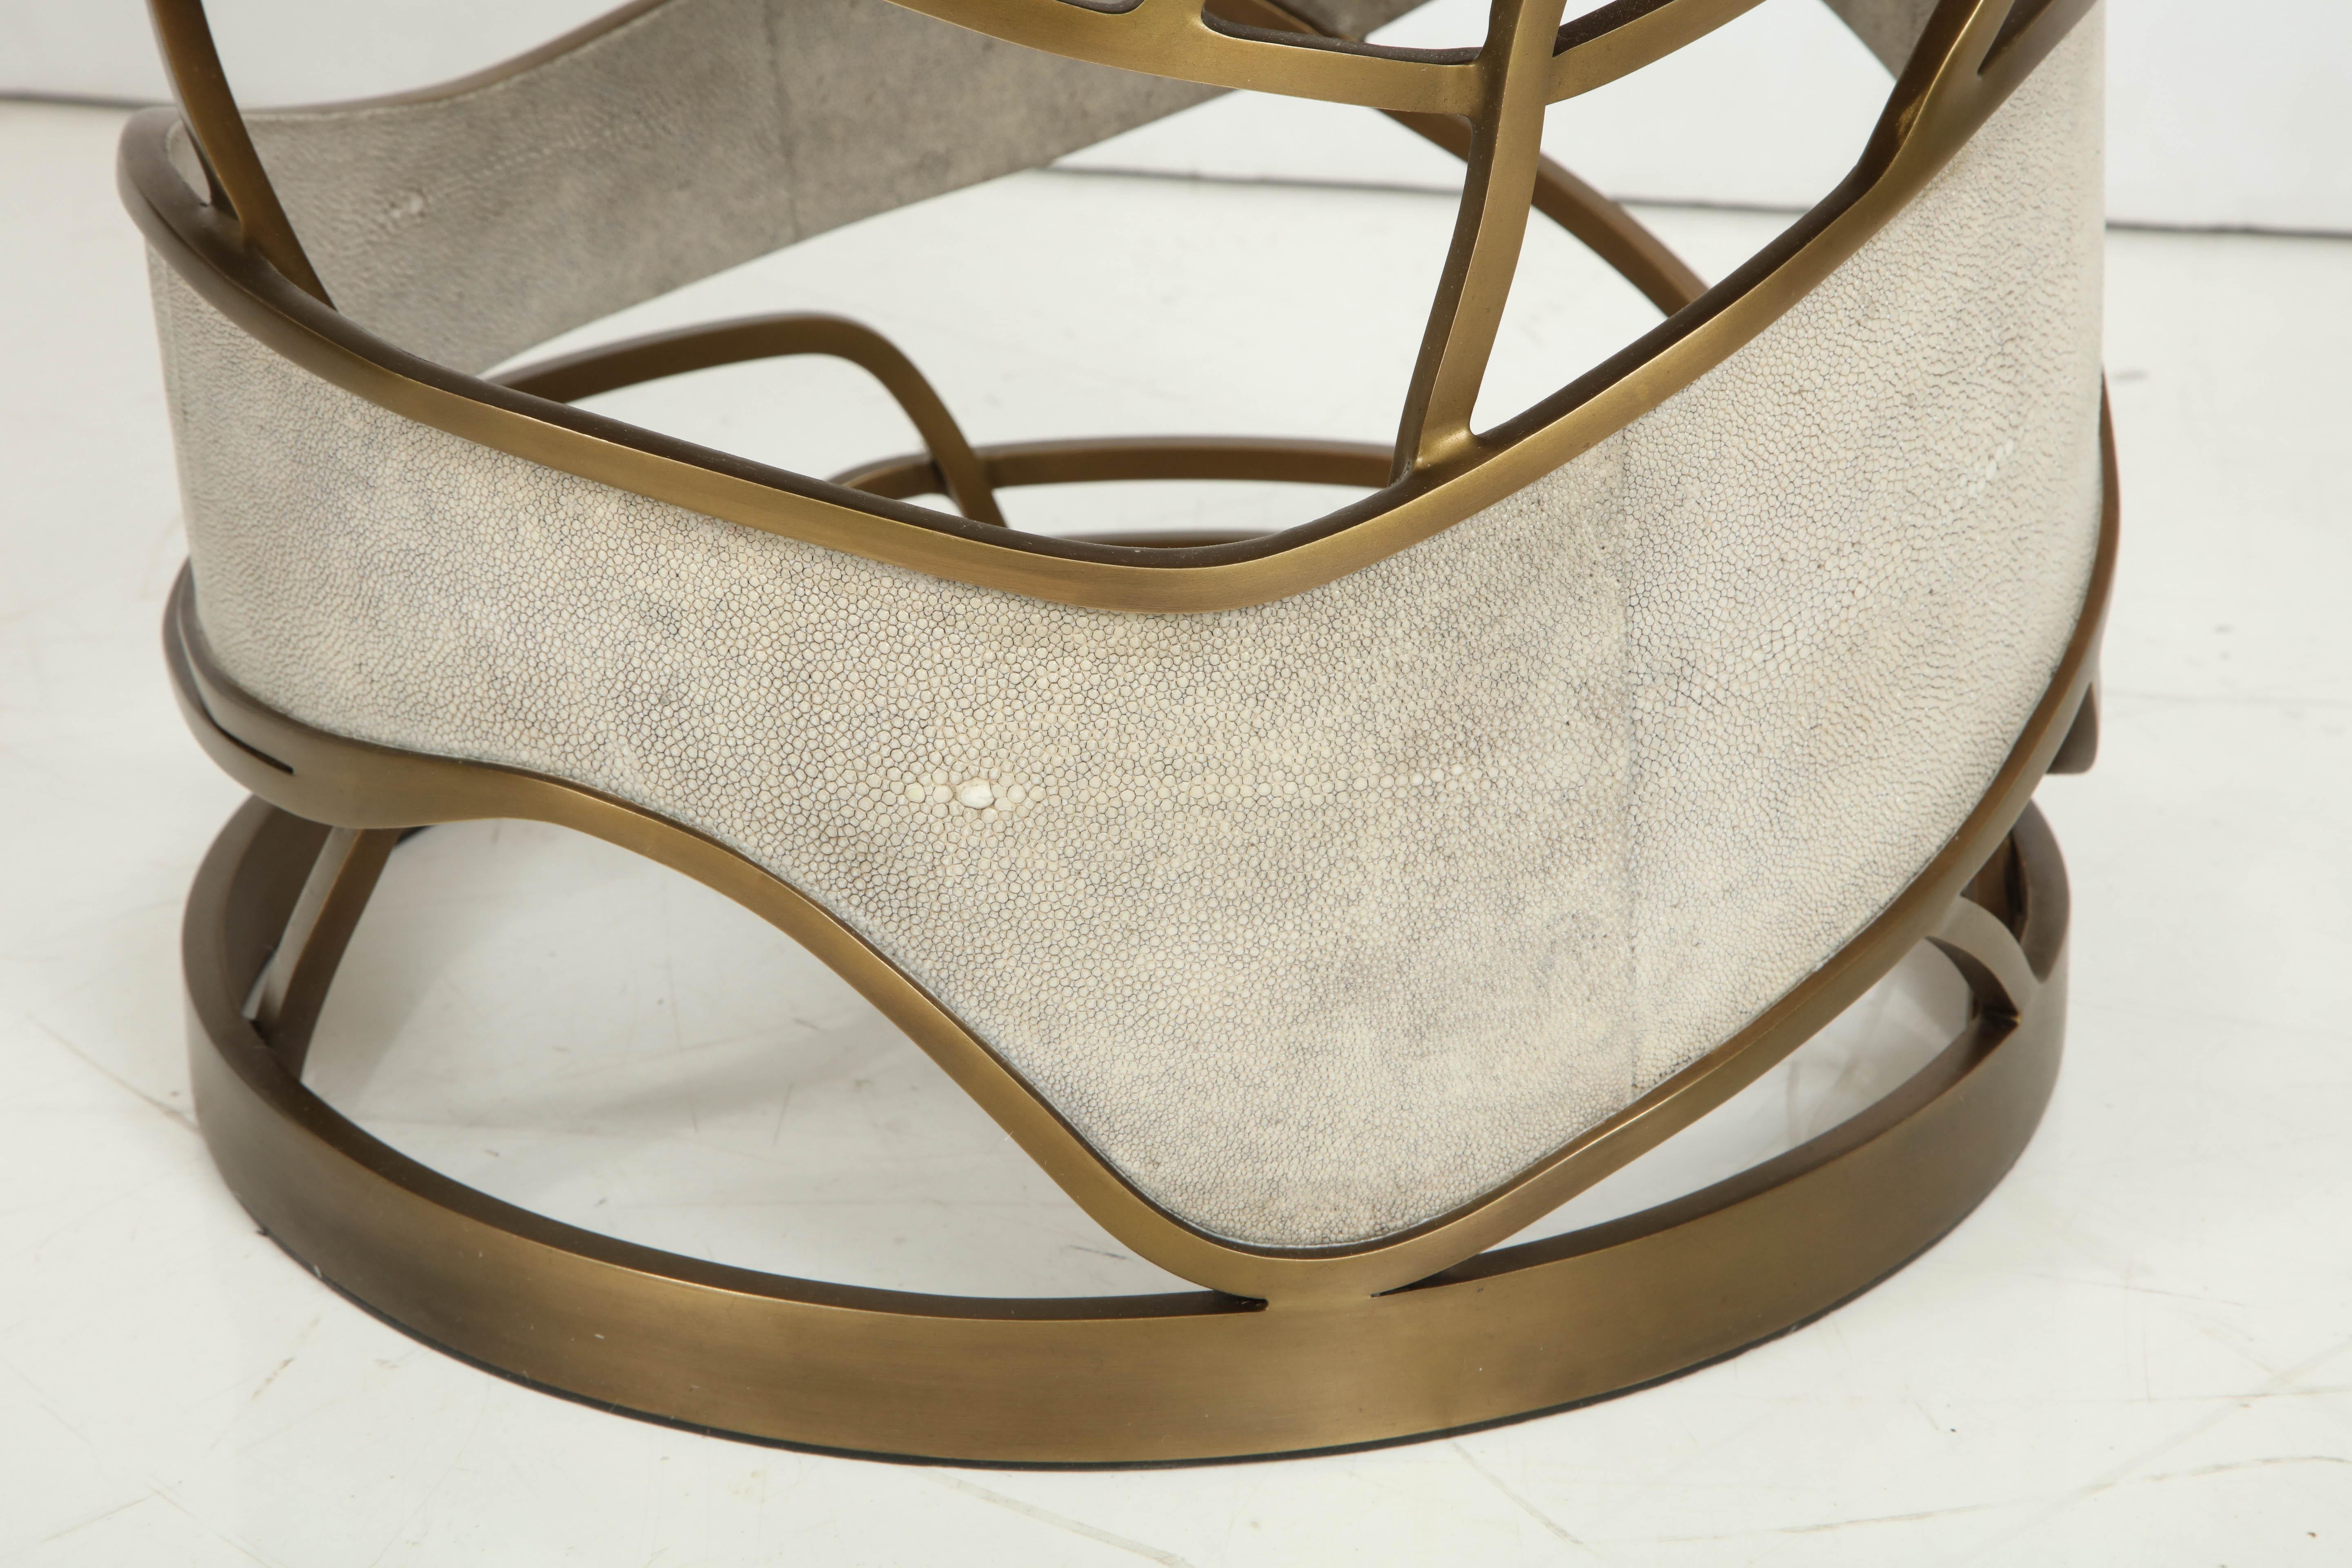 Philippine Shagreen Stool or Side Table with Brass Details, Contemporary, Cream Shagreen